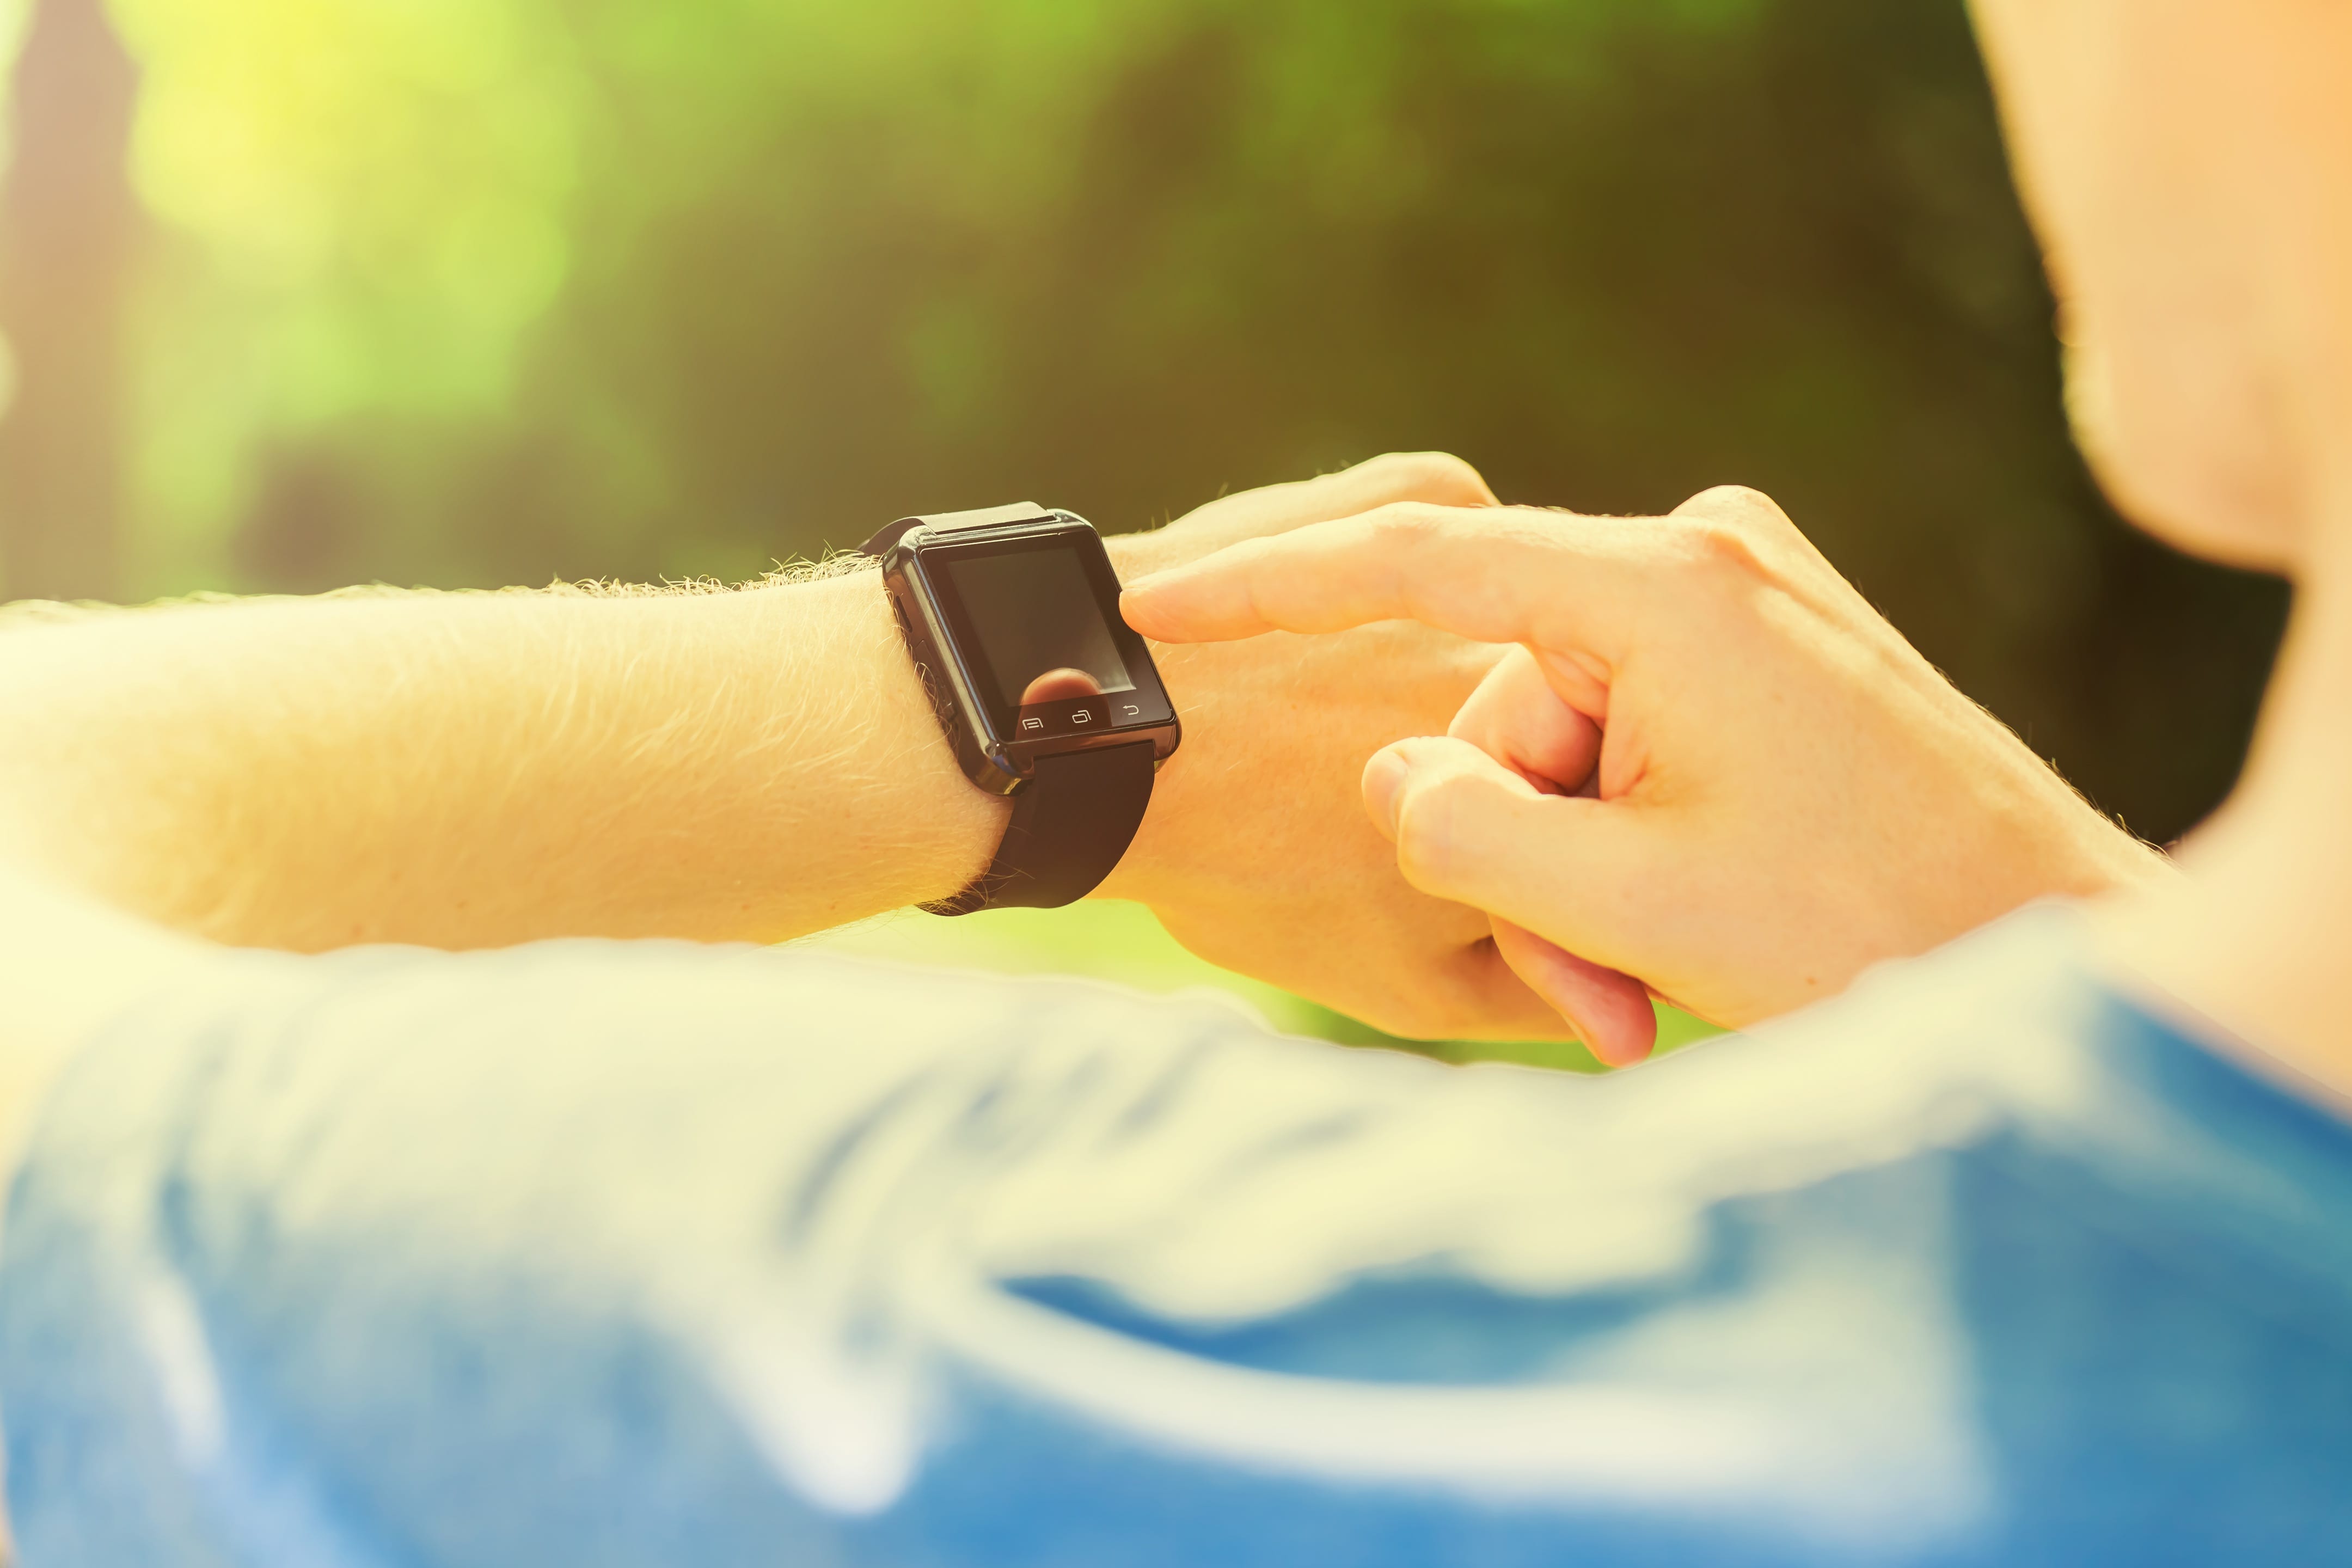 Wearing It Well: Is Field Service The Killer App for Wearable Computing?